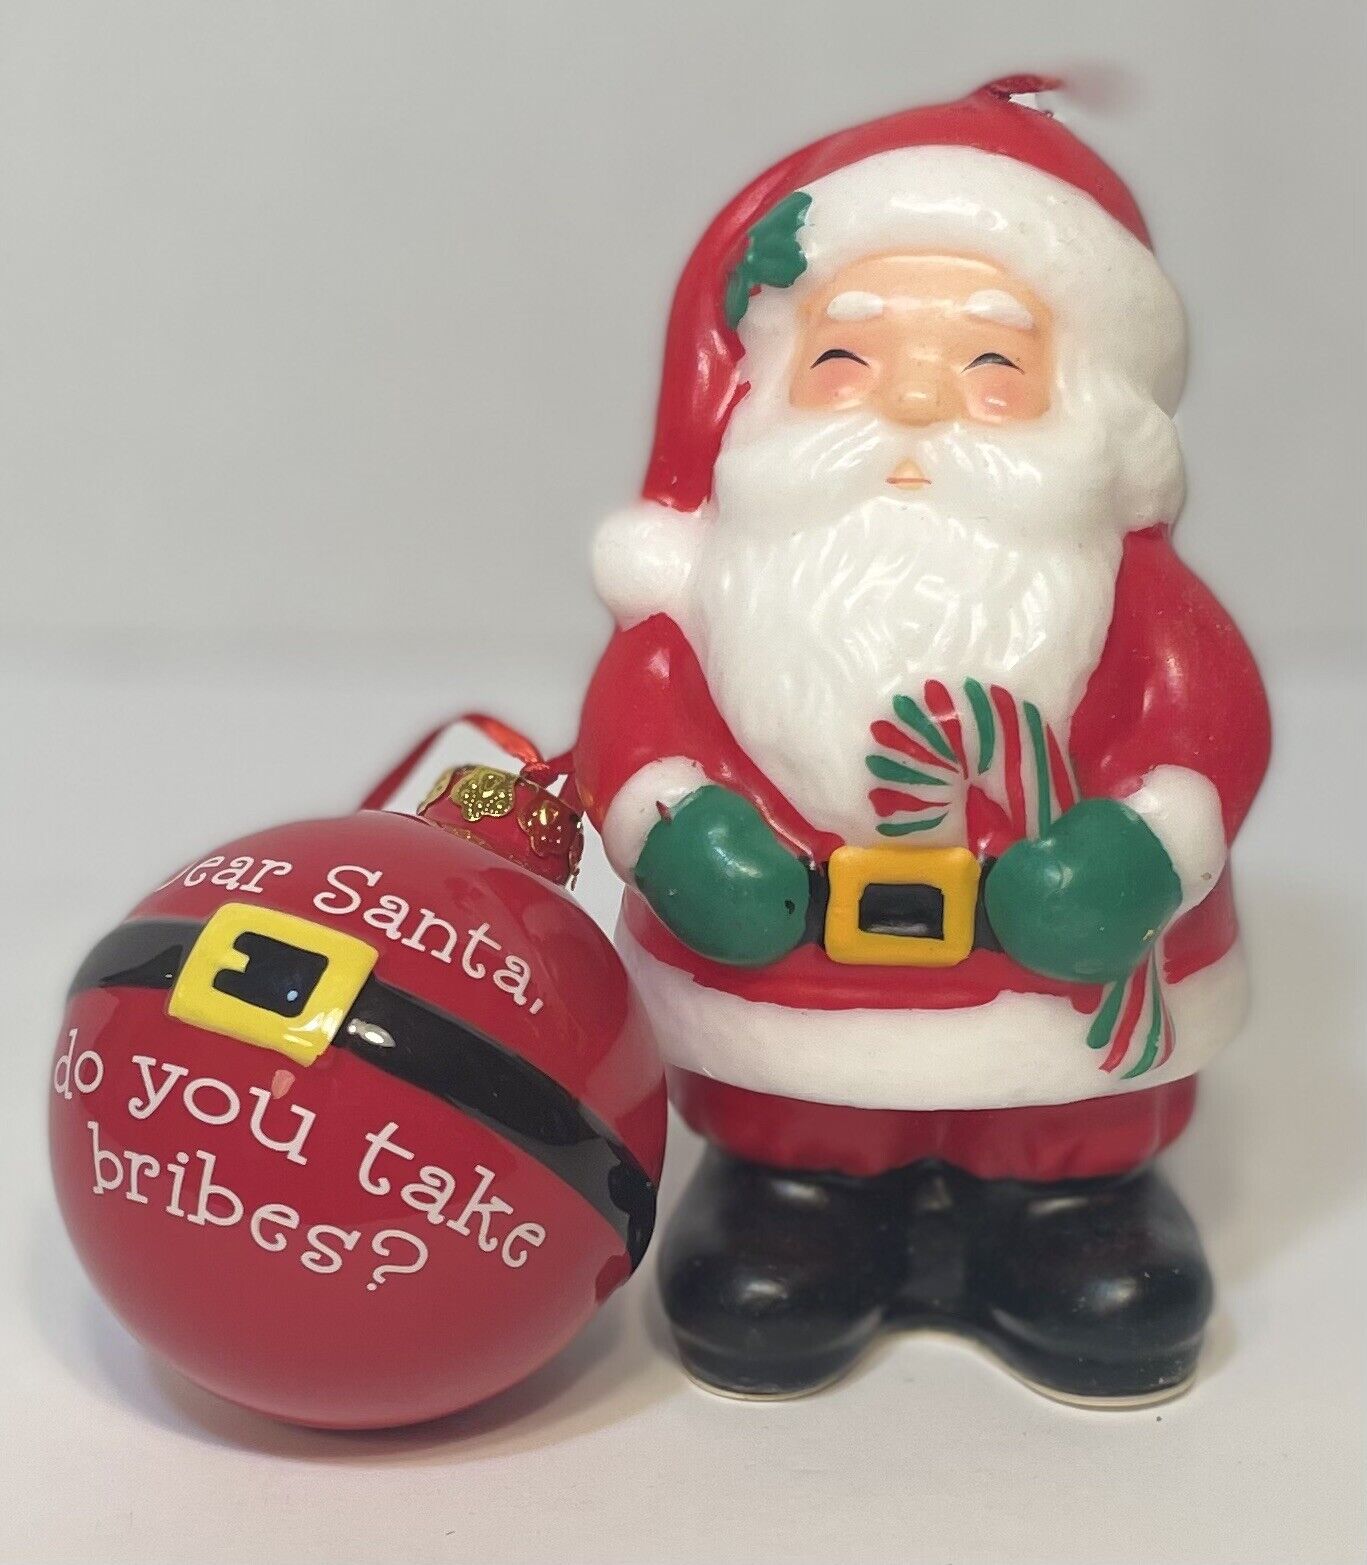 Vintage AVON Santa Candle And “Do You Take Bribes” Funny Ornament Combo 2 Pieces